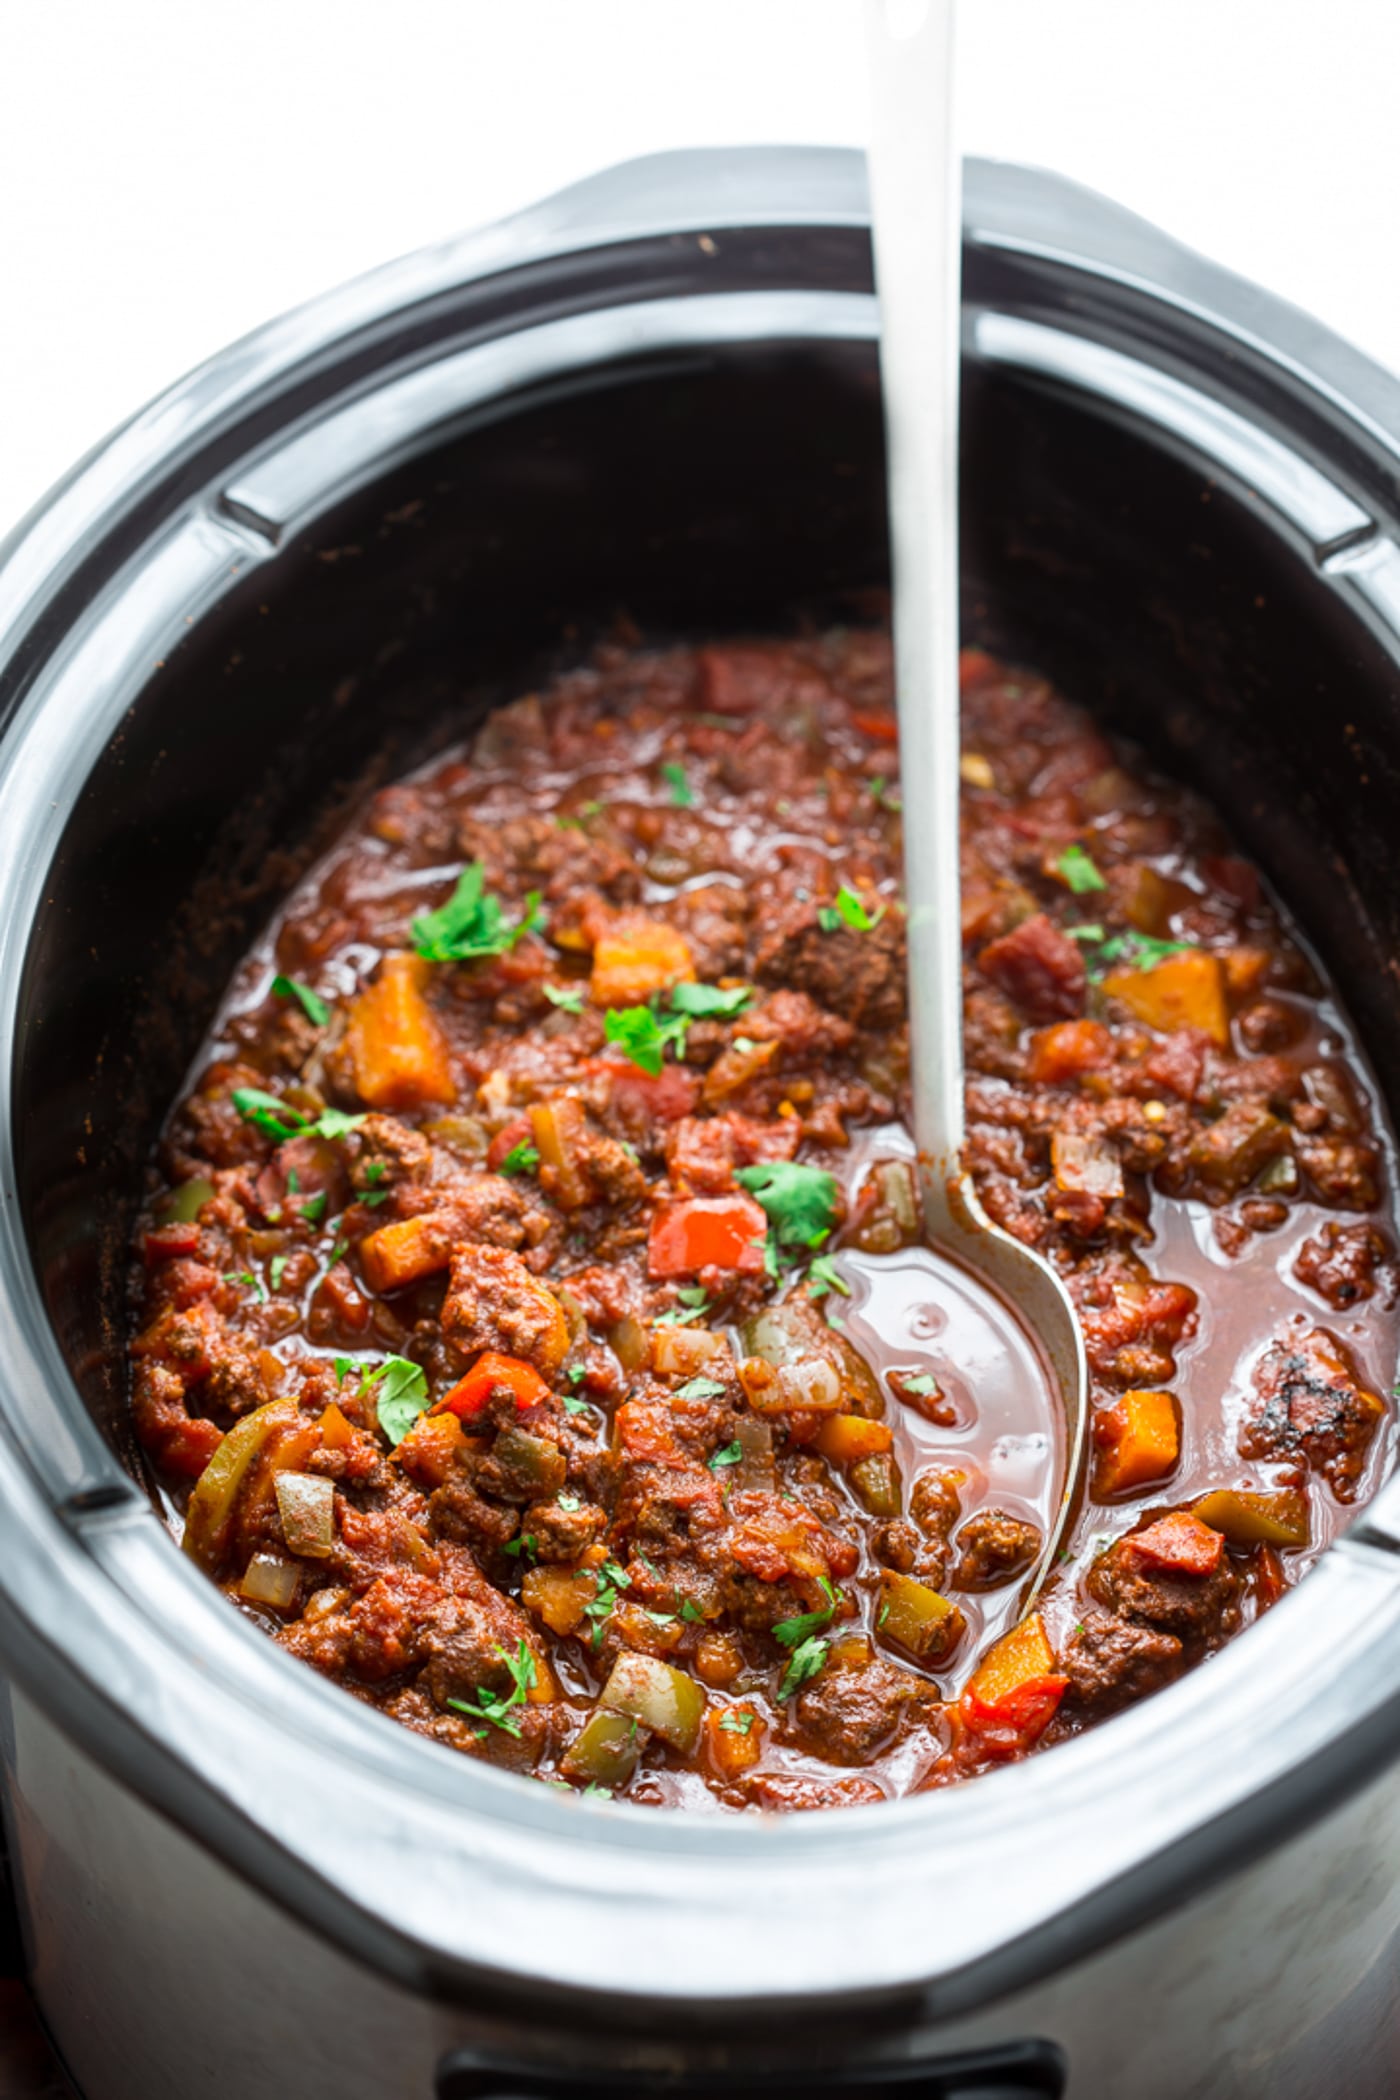 Paleo beef chili is not only easy to make in a slow cooker, but also full of flavor! Loaded with sweet potatoes, beef, spices, tomatoes, and more. It's whole 30 friendly, quick to prep, and pure comfort food. | CotterCrunch.com